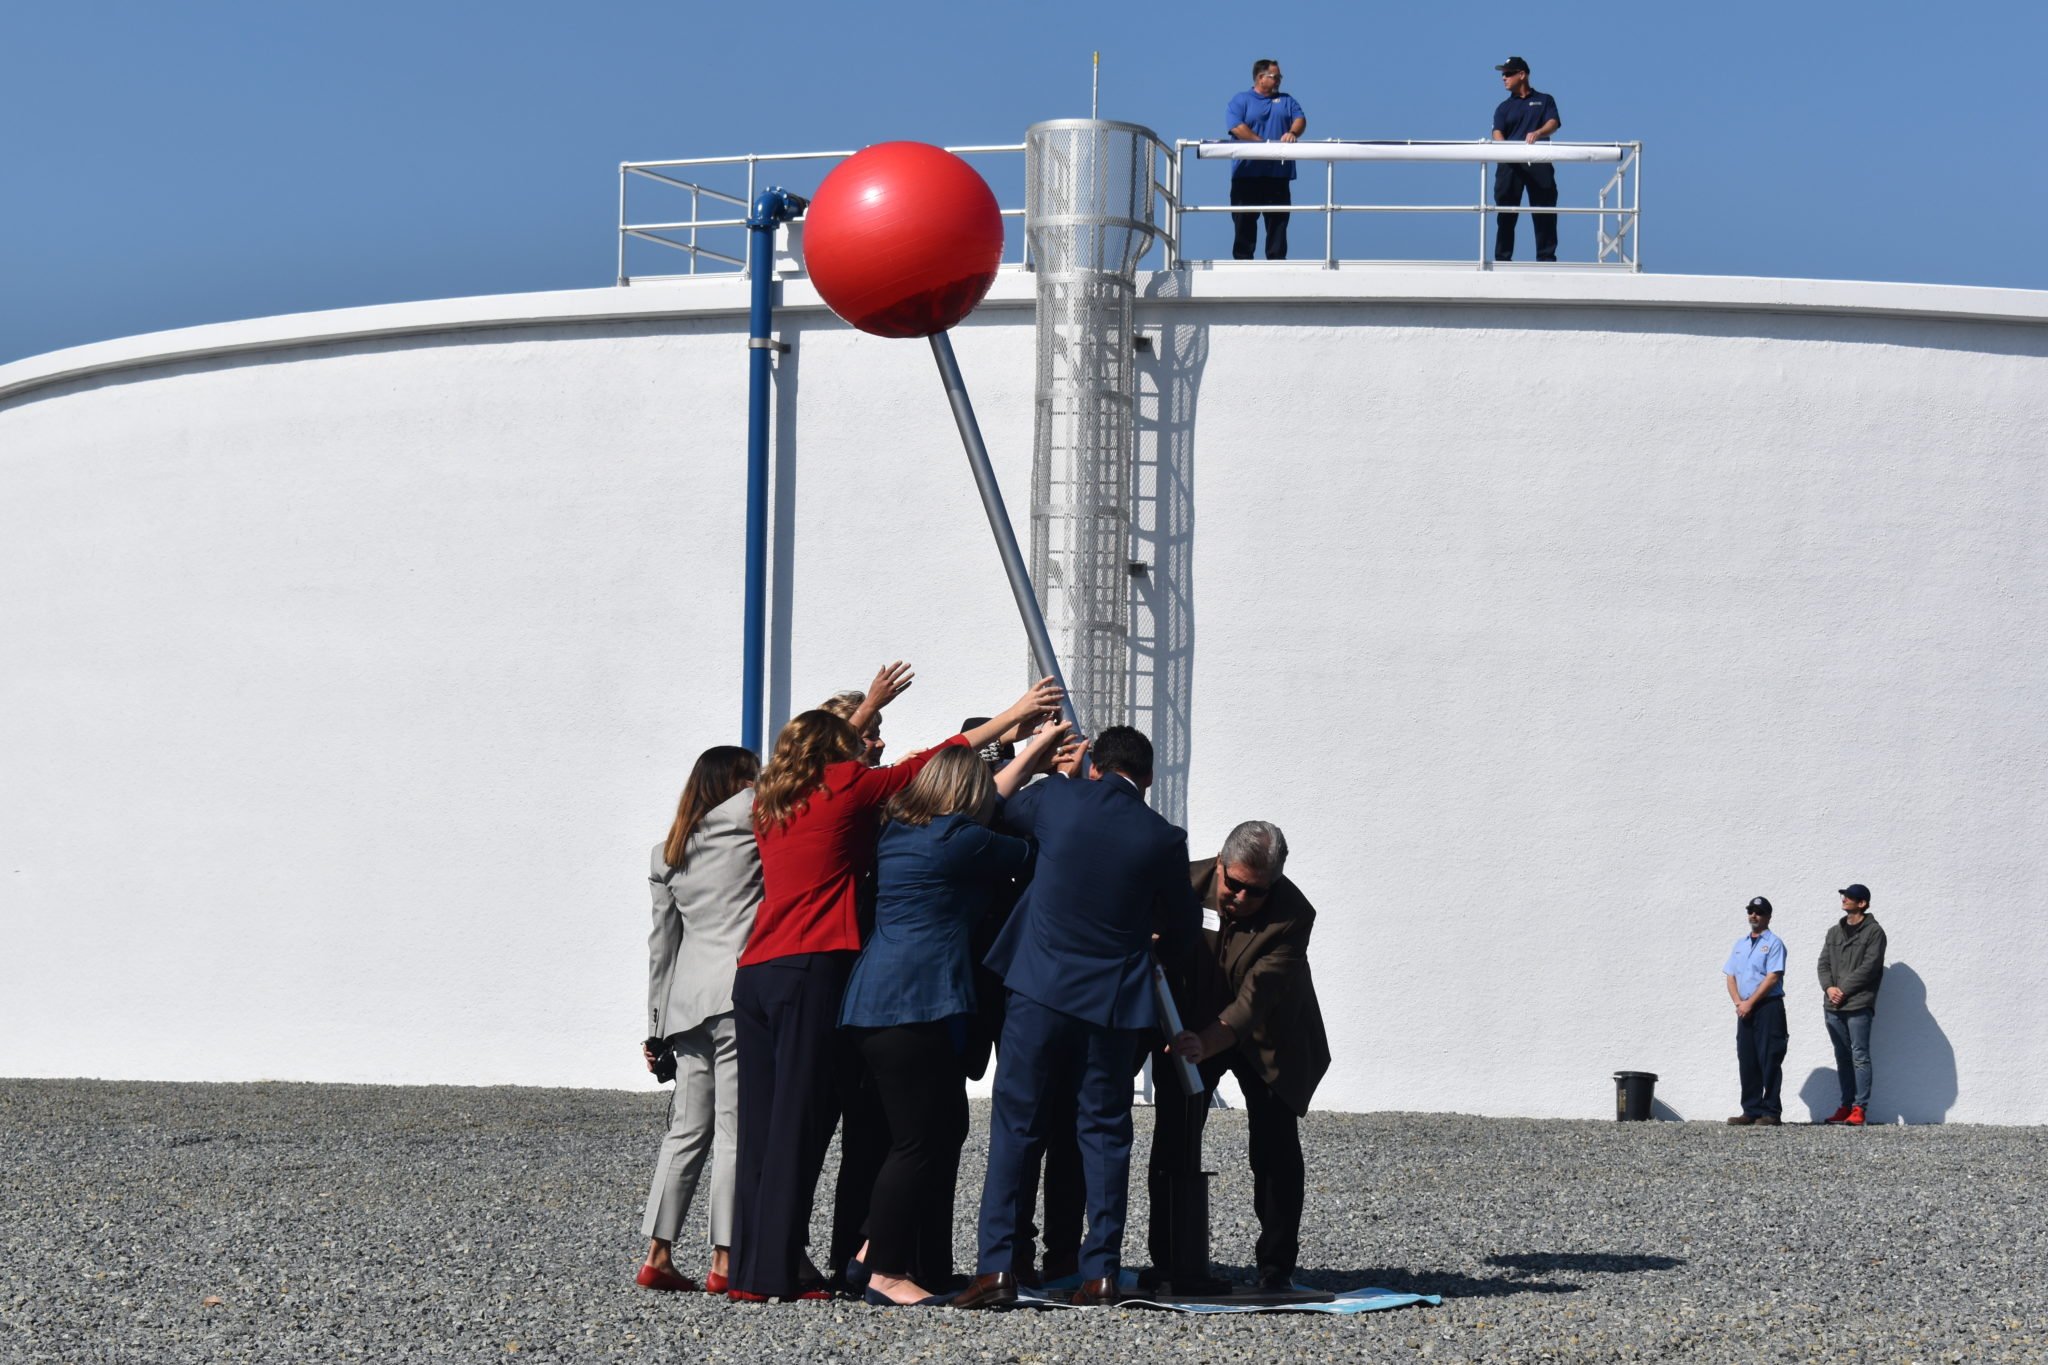 Group of people lift a red google maps location pin in front of a water plant